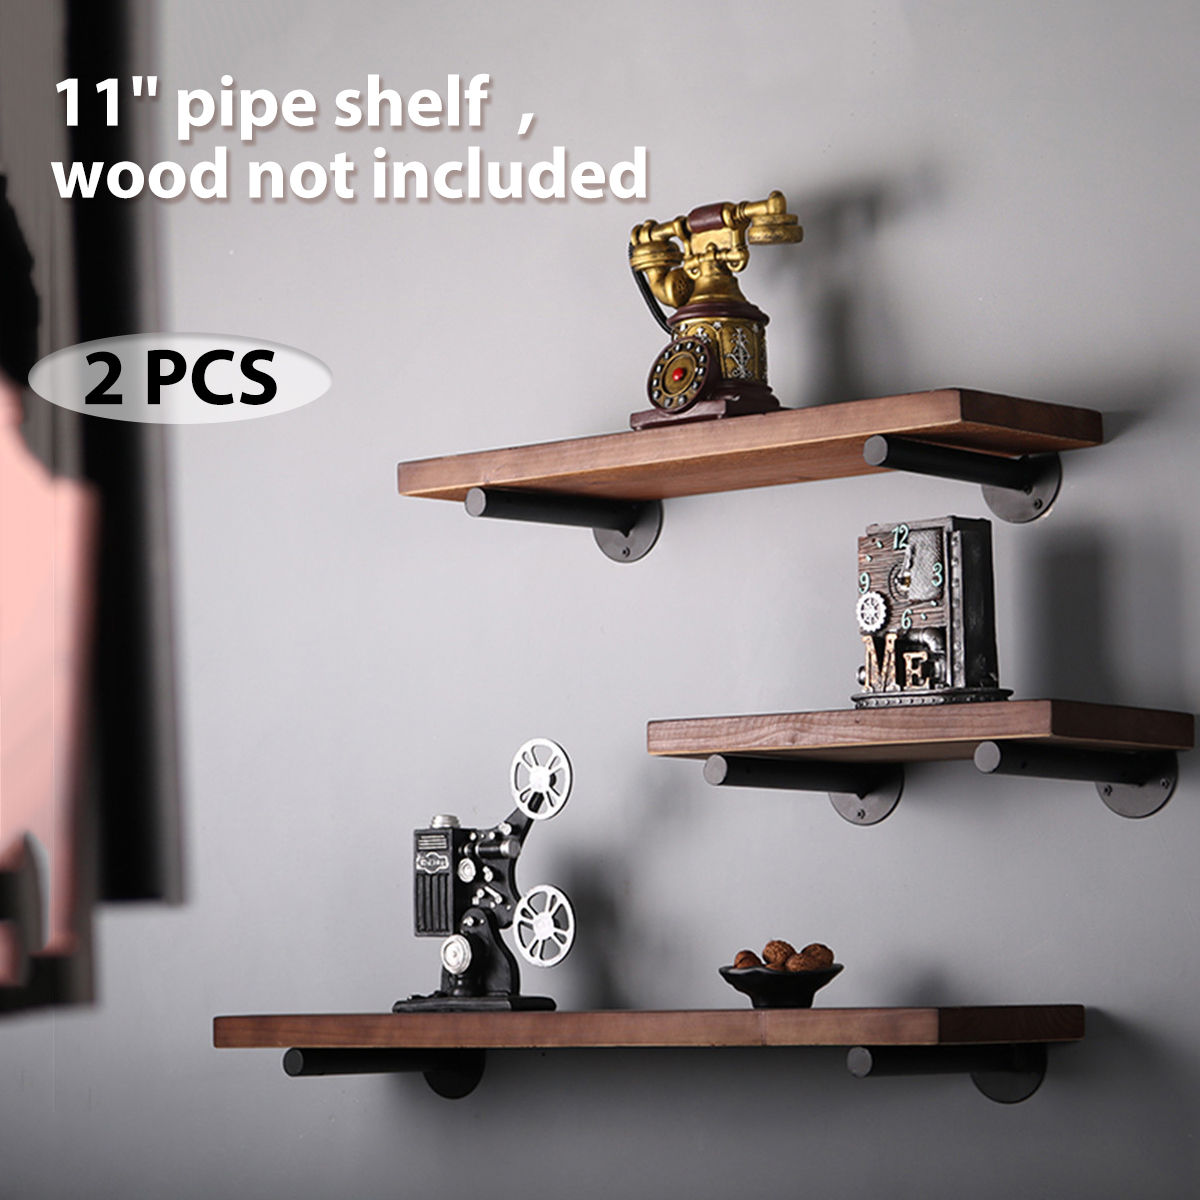 industrial black iron pipe shelf brackets steampunk floating shelves friday decor hardware retro wall mounted shelving with screws storage rack garage workbench systems office